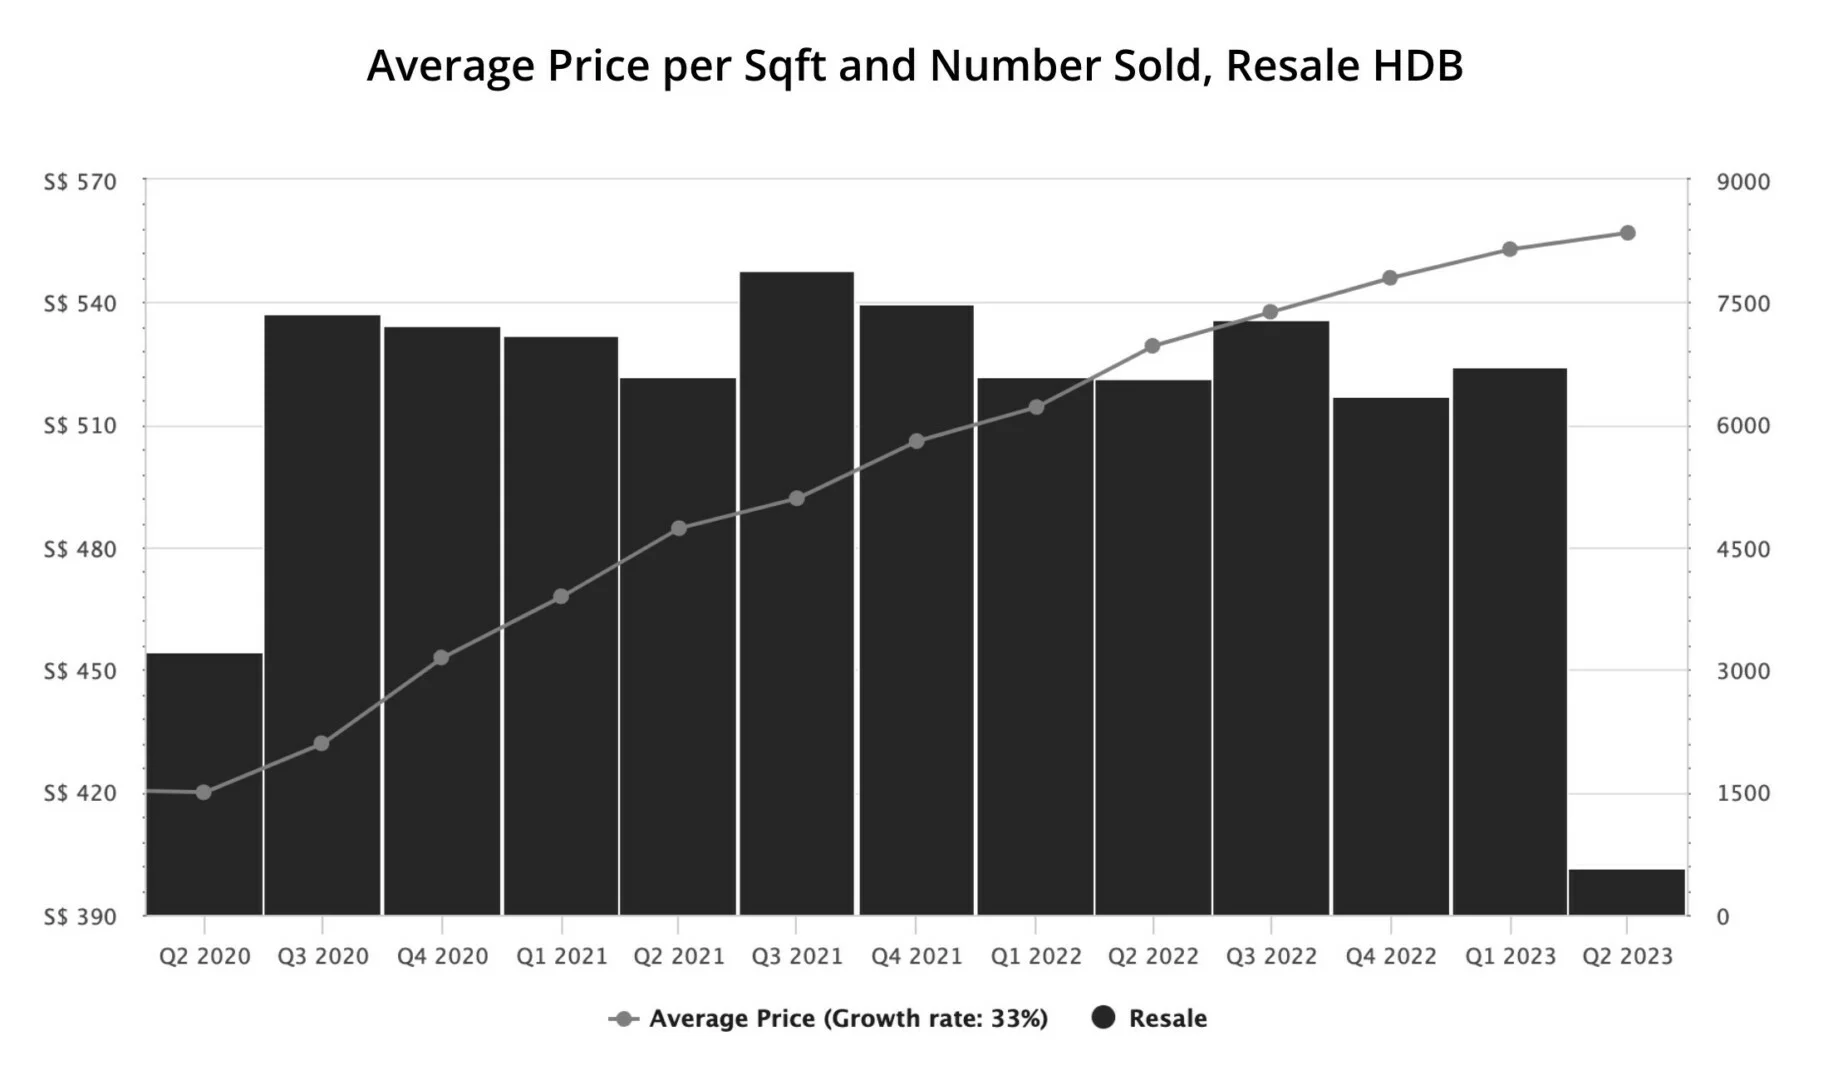 Graph of the average price per sqft and number sold for resale HDB